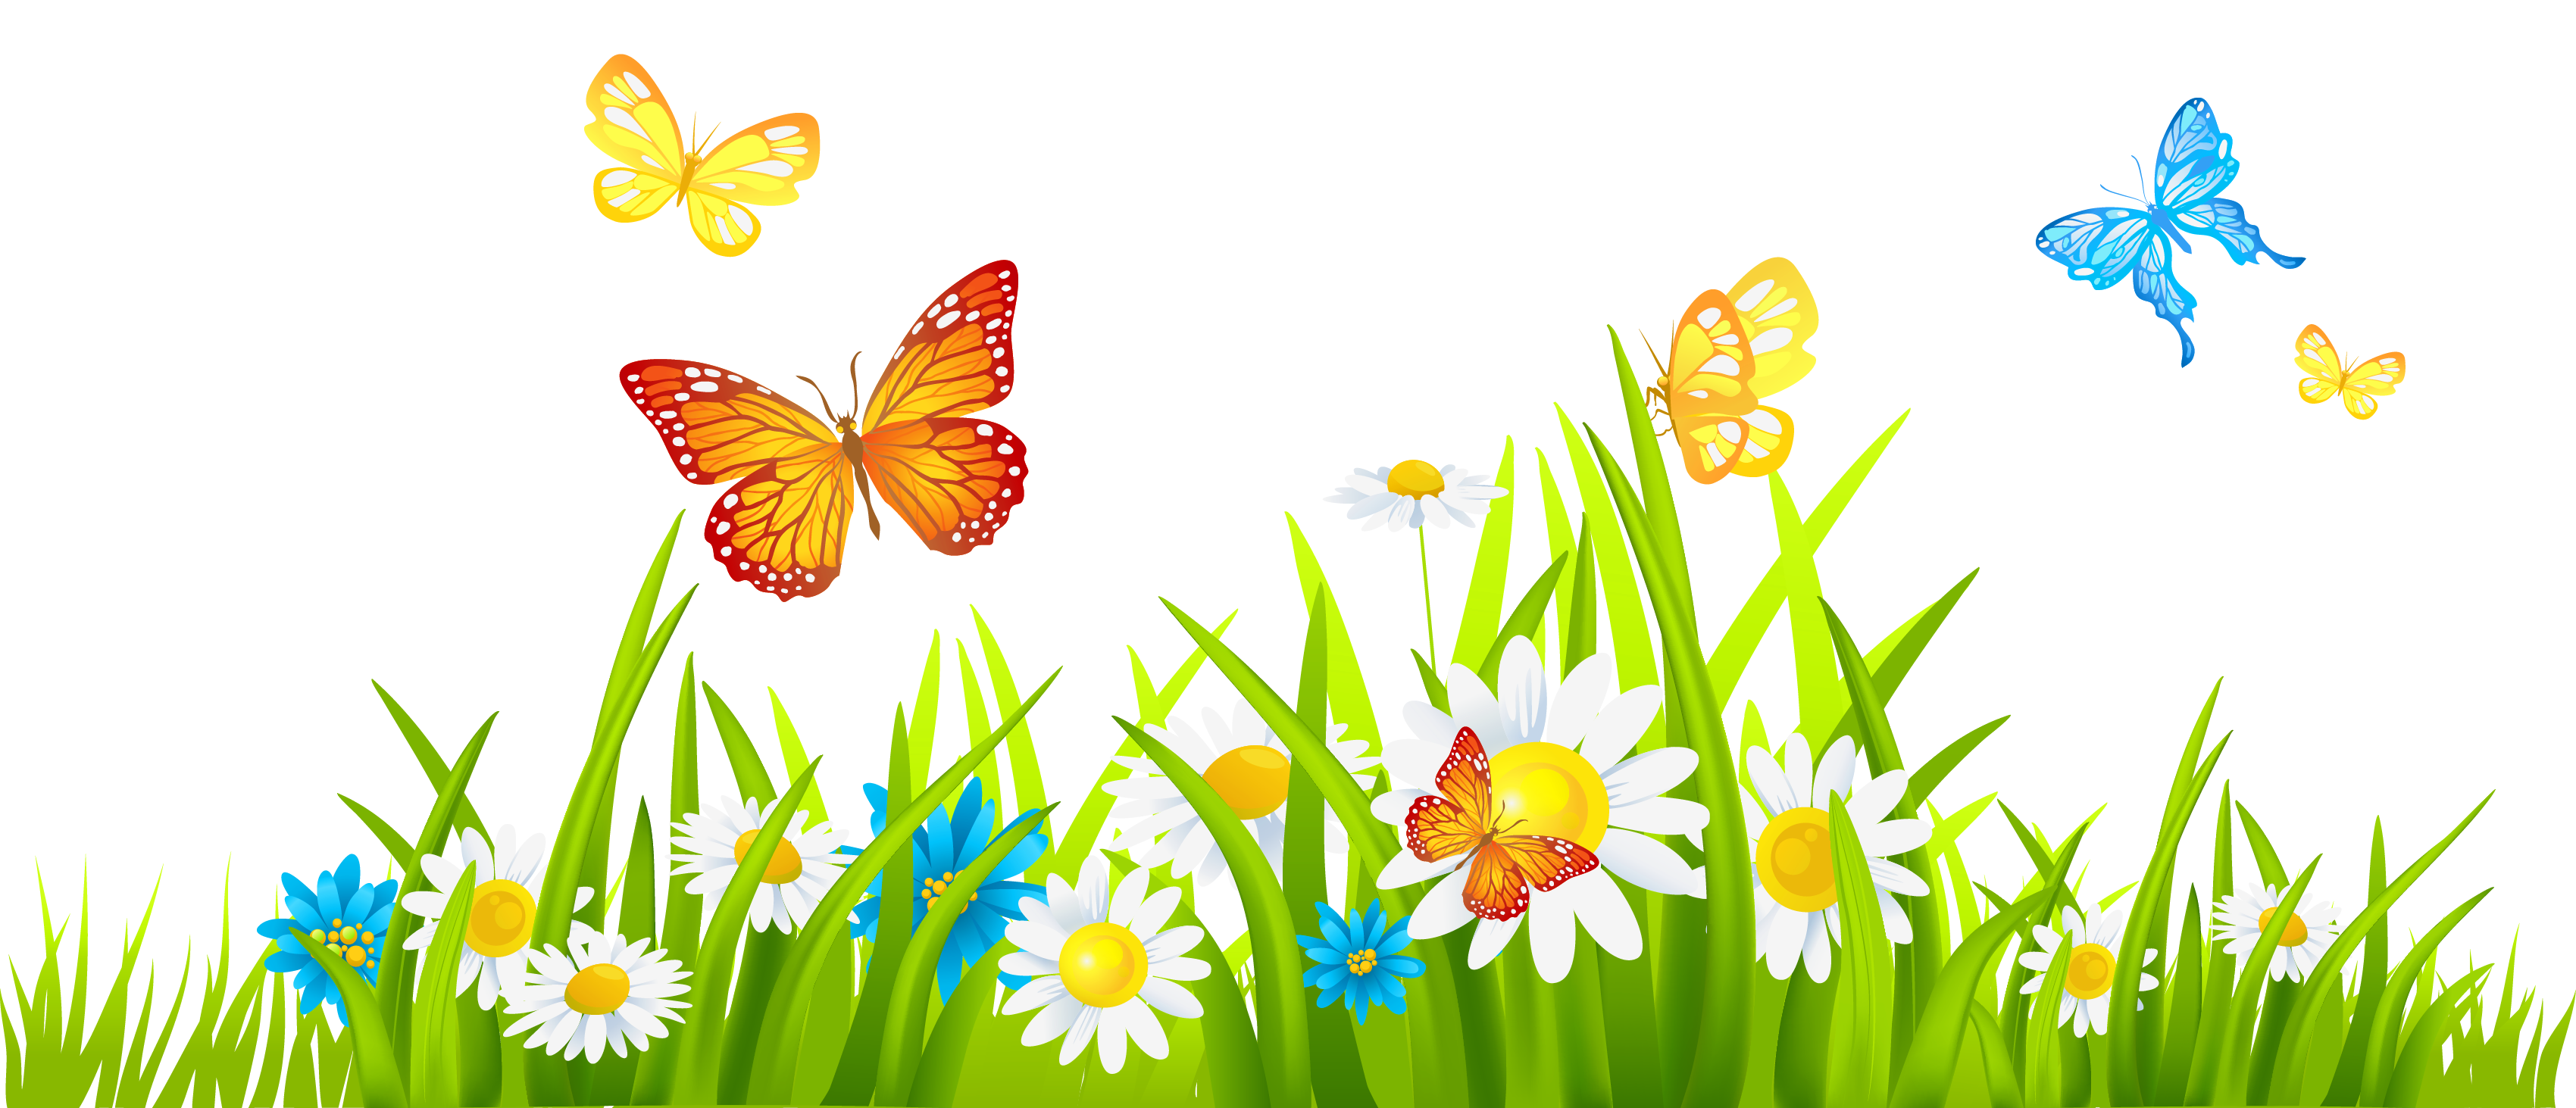 Grass And Flowers Images Hd Photos Clipart